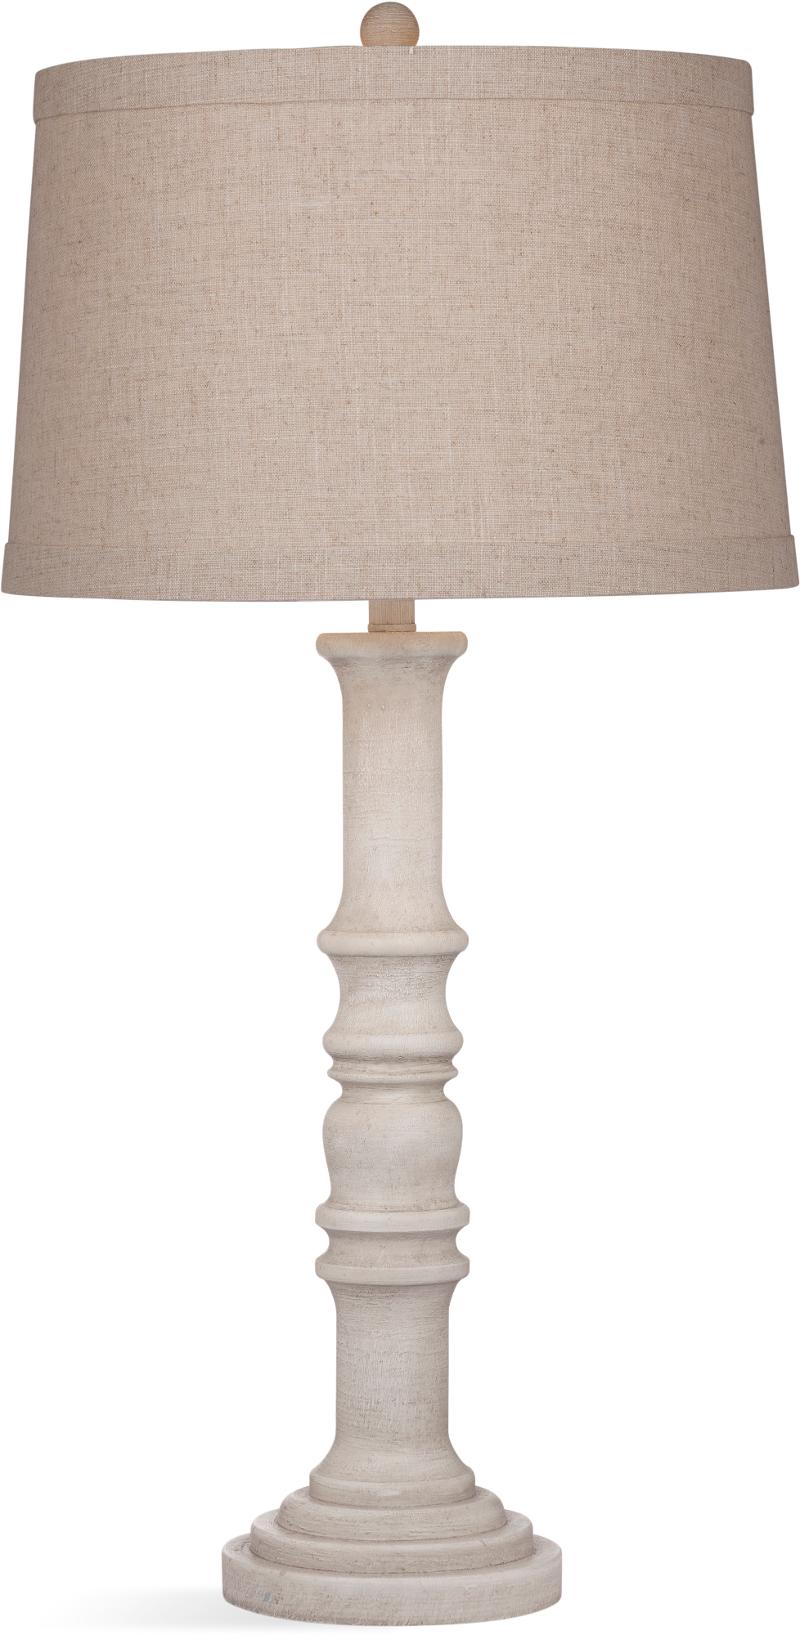 Antique White Wash Table Lamp Augusta, Antique White Table Lamp